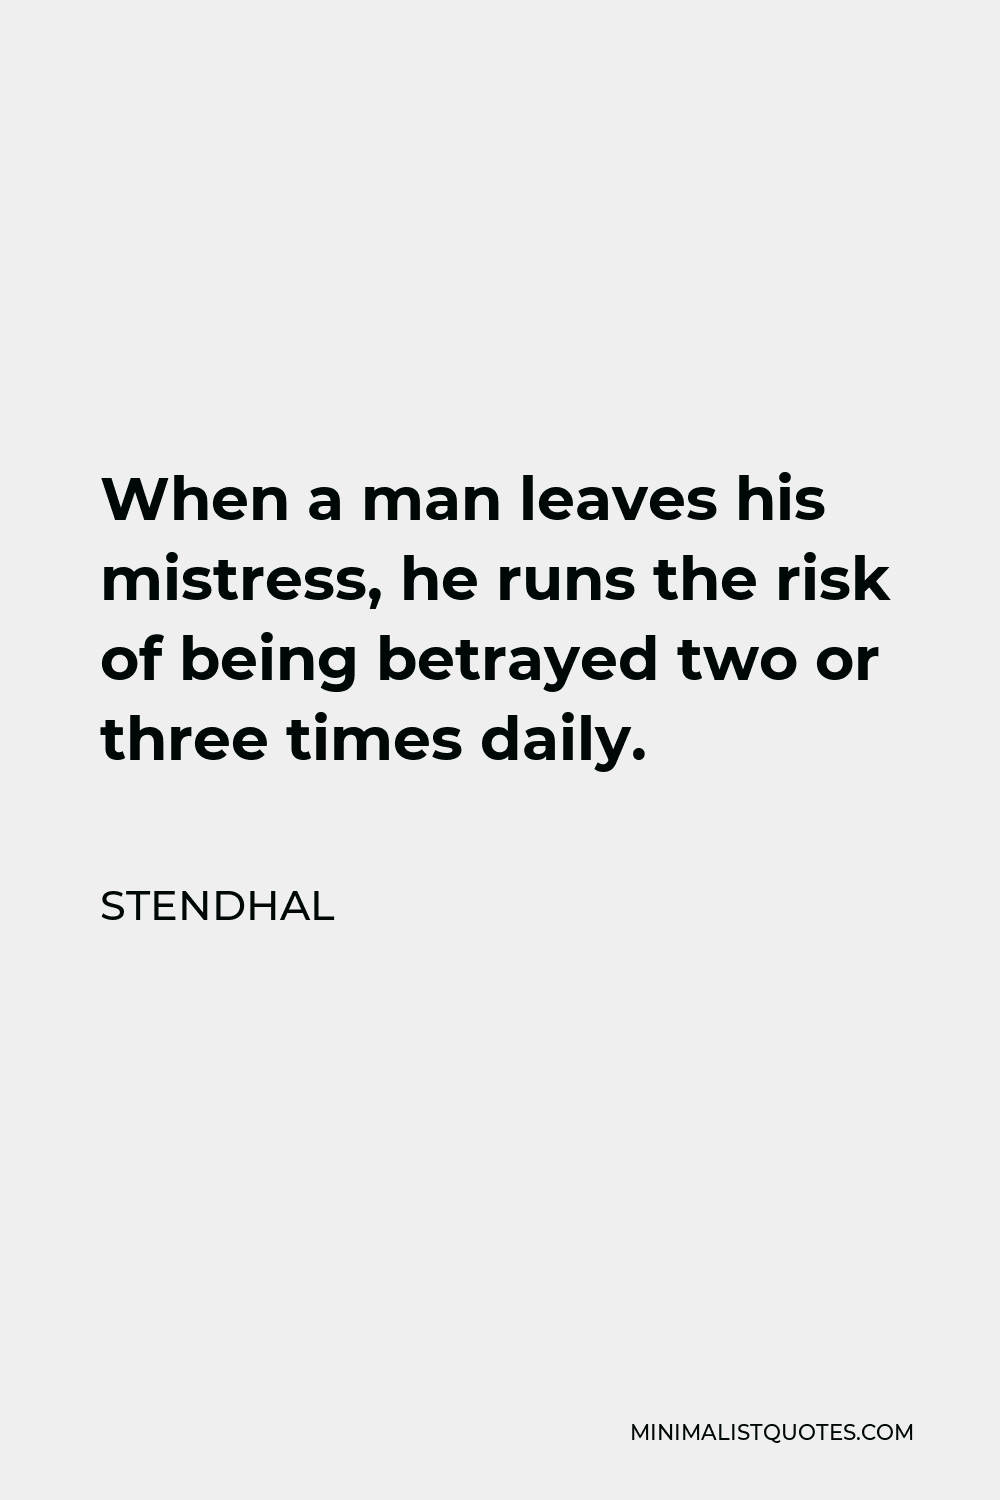 Stendhal Quote - When a man leaves his mistress, he runs the risk of being betrayed two or three times daily.